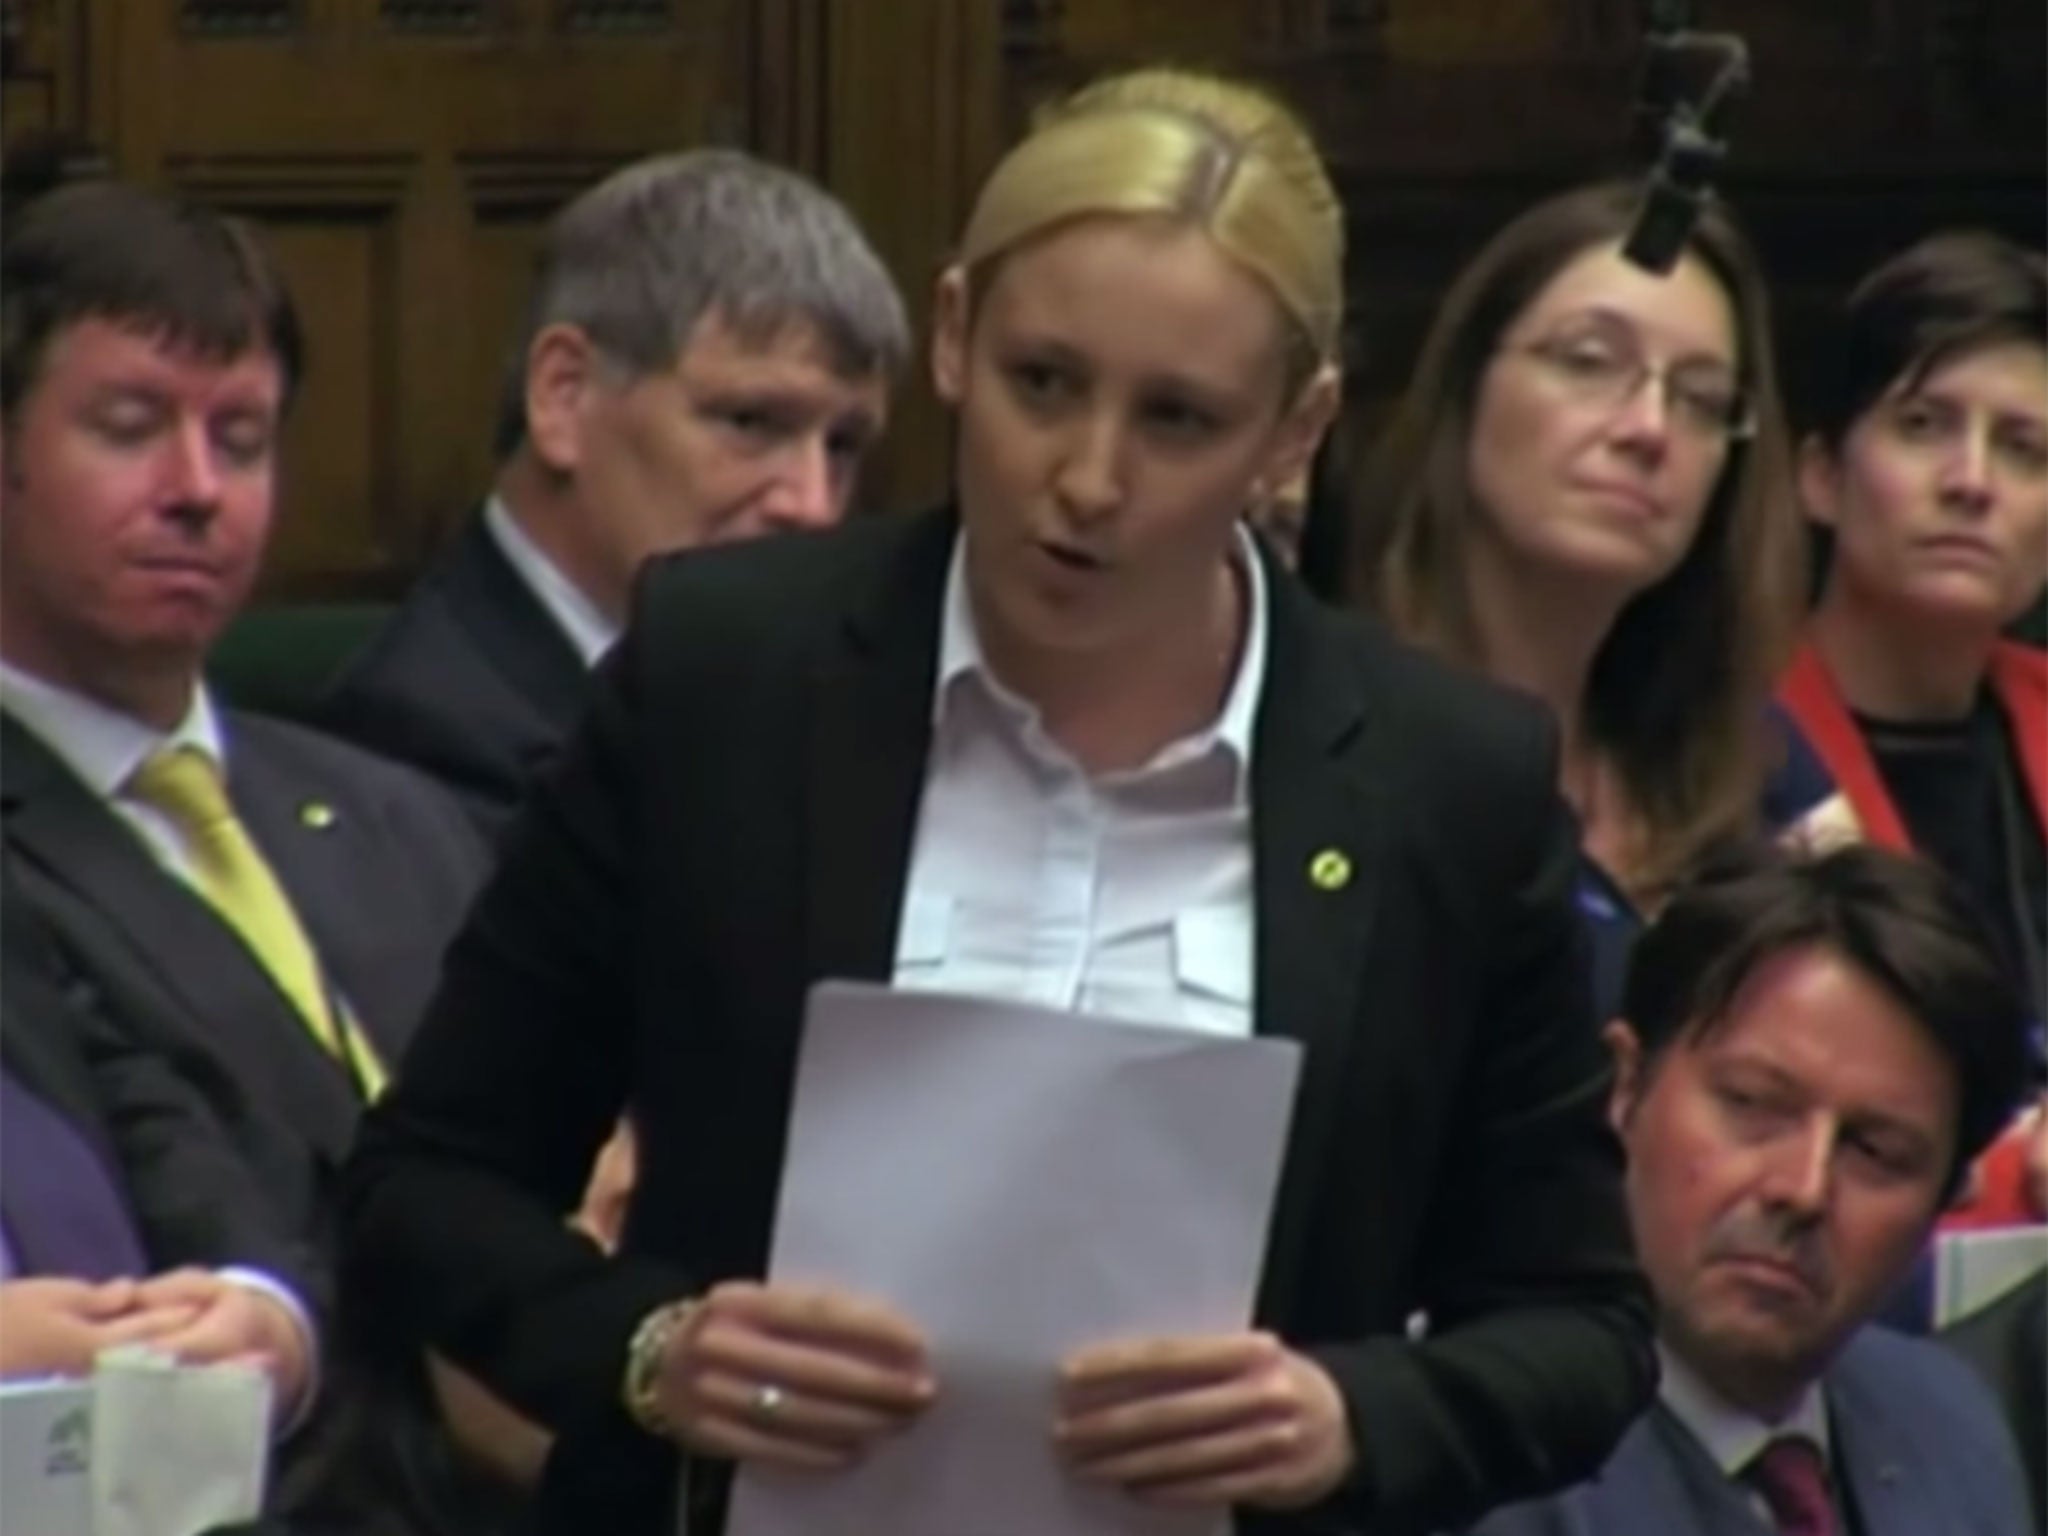 The debate was led by SNP MP Mhairi Back